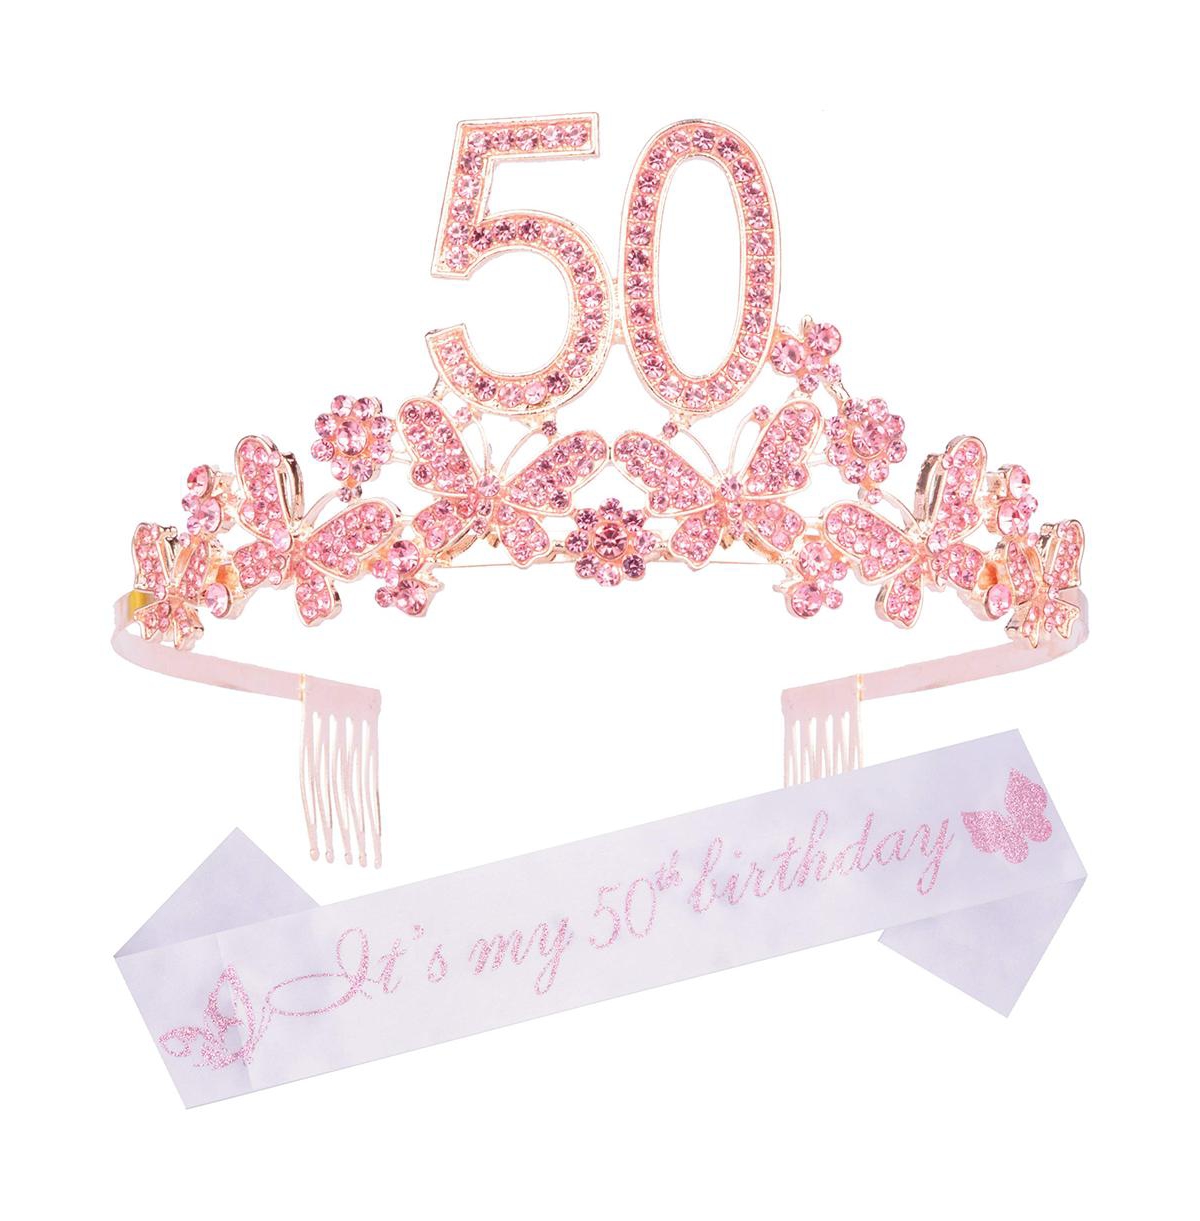 50th Birthday Sash and Tiara Set for Women - Perfect for Celebrating Her 50th Birthday Party - Pink